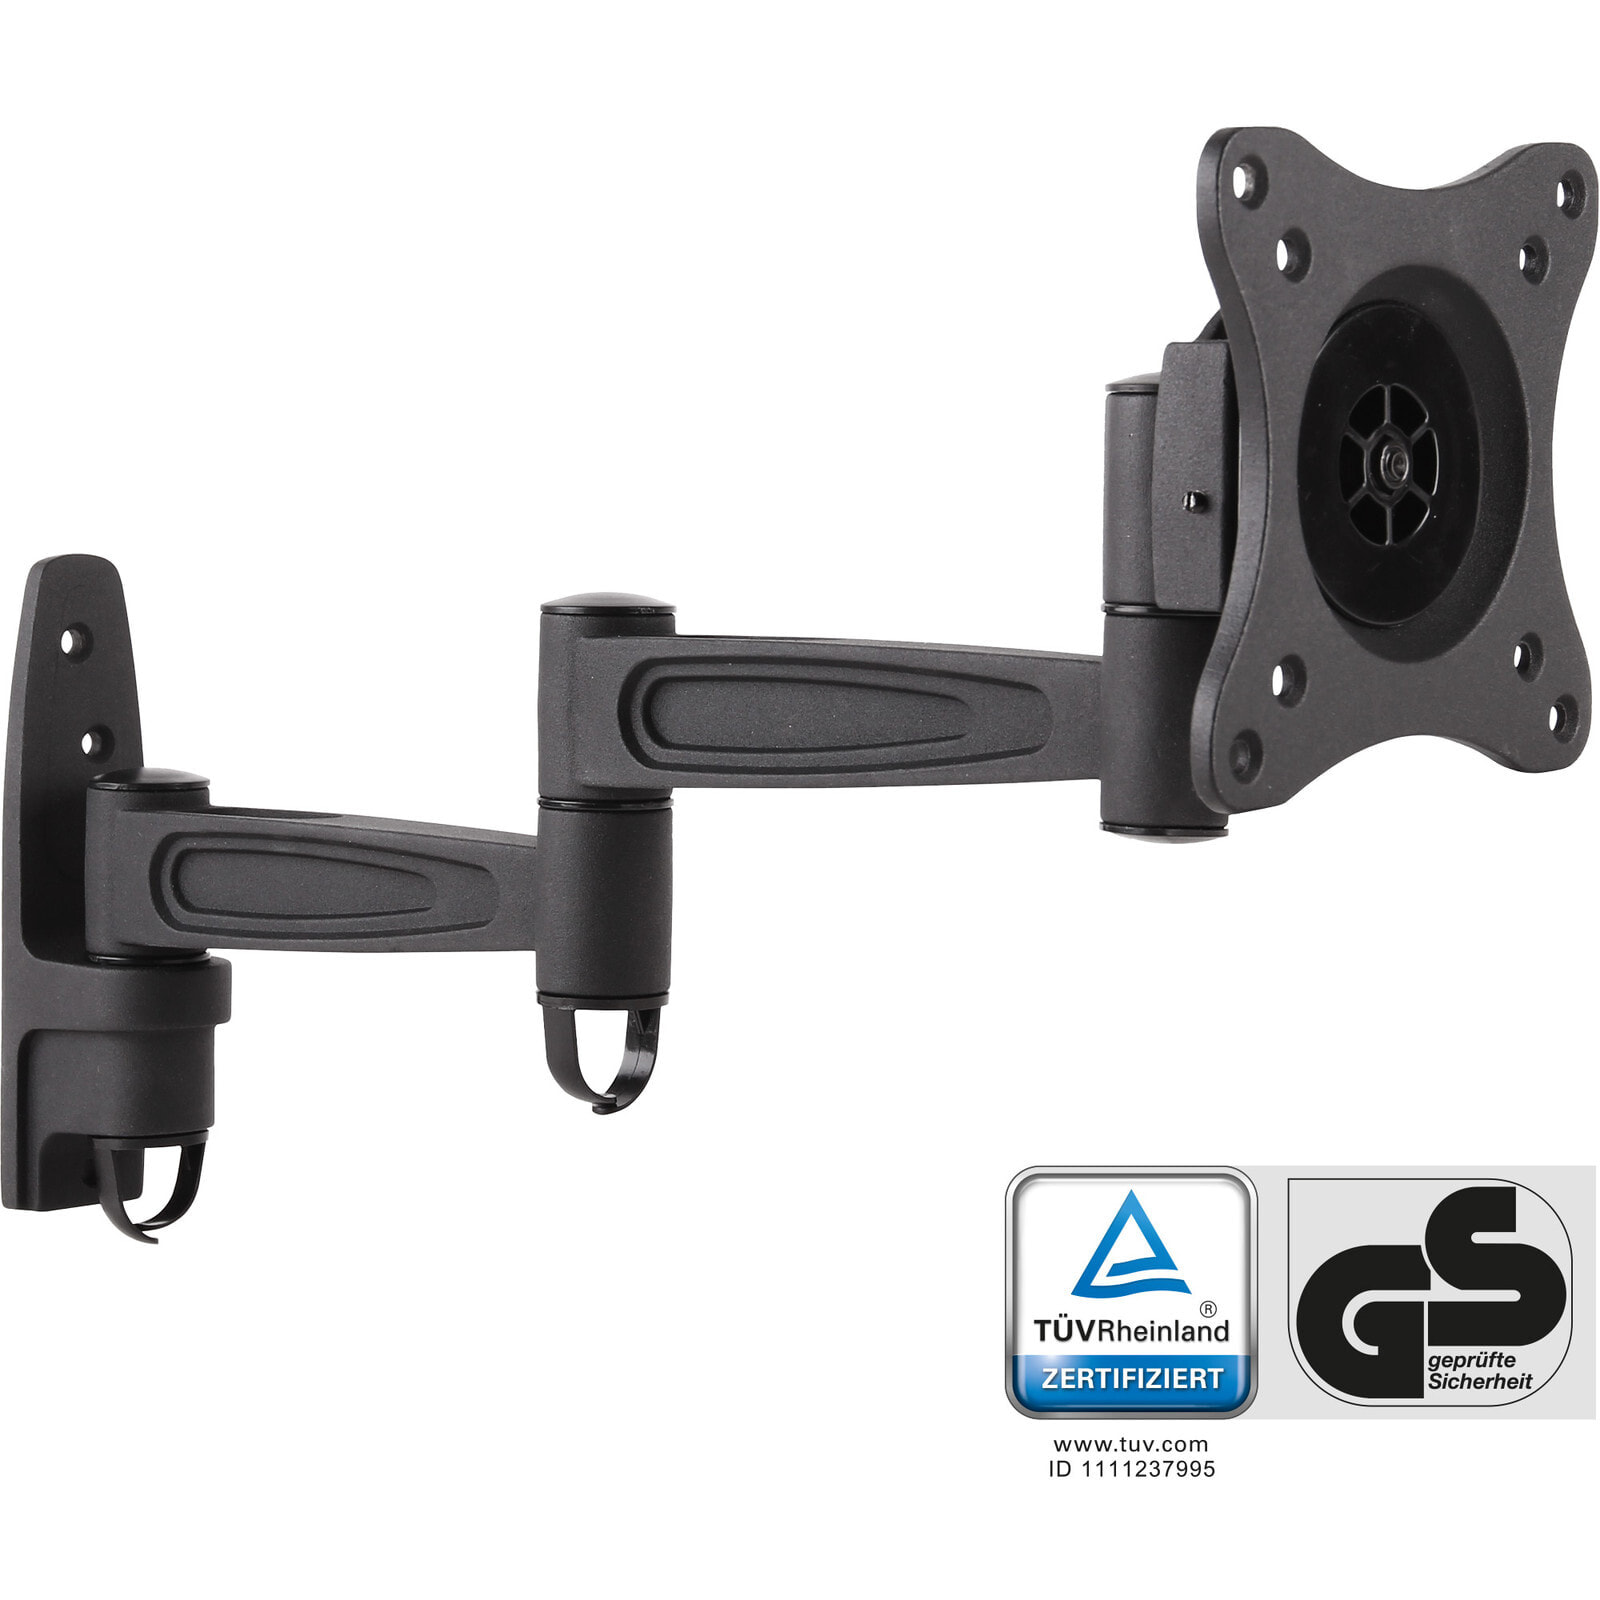 InLine Wall mount - for monitors up to 69cm (27